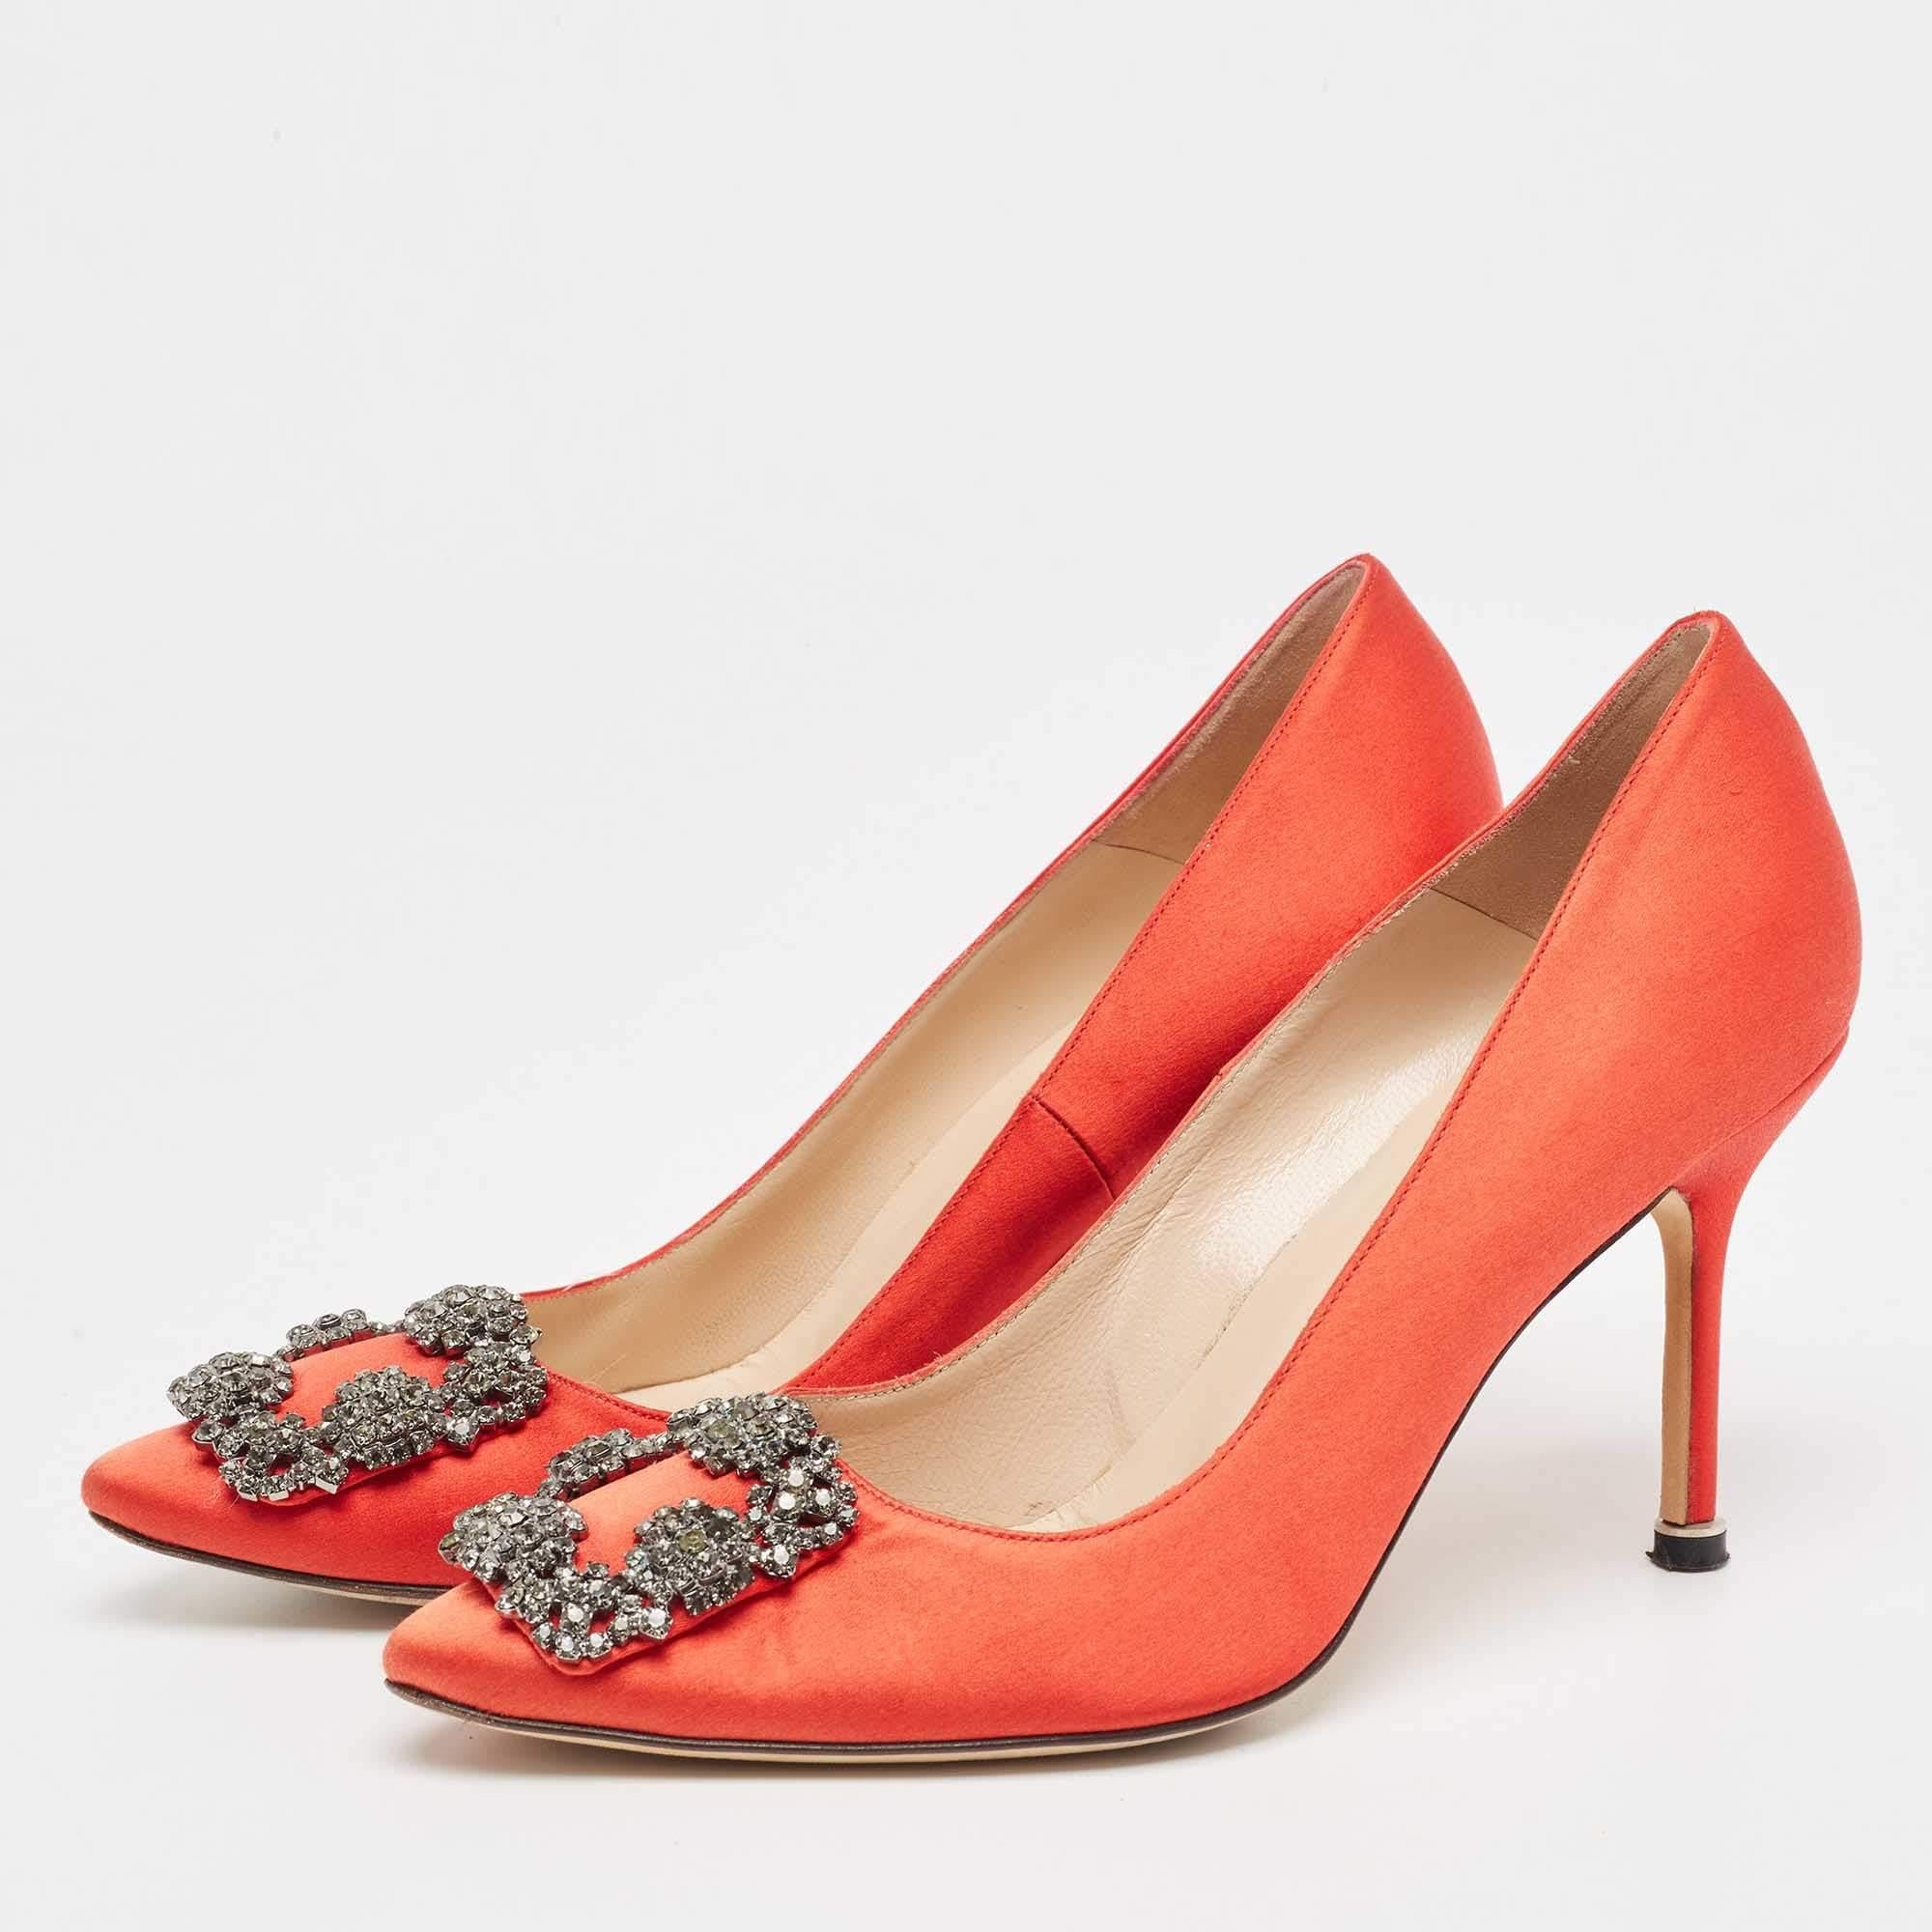 Manolo Blahnik Red Satin Hangisi Pumps Size 37 For Sale 3